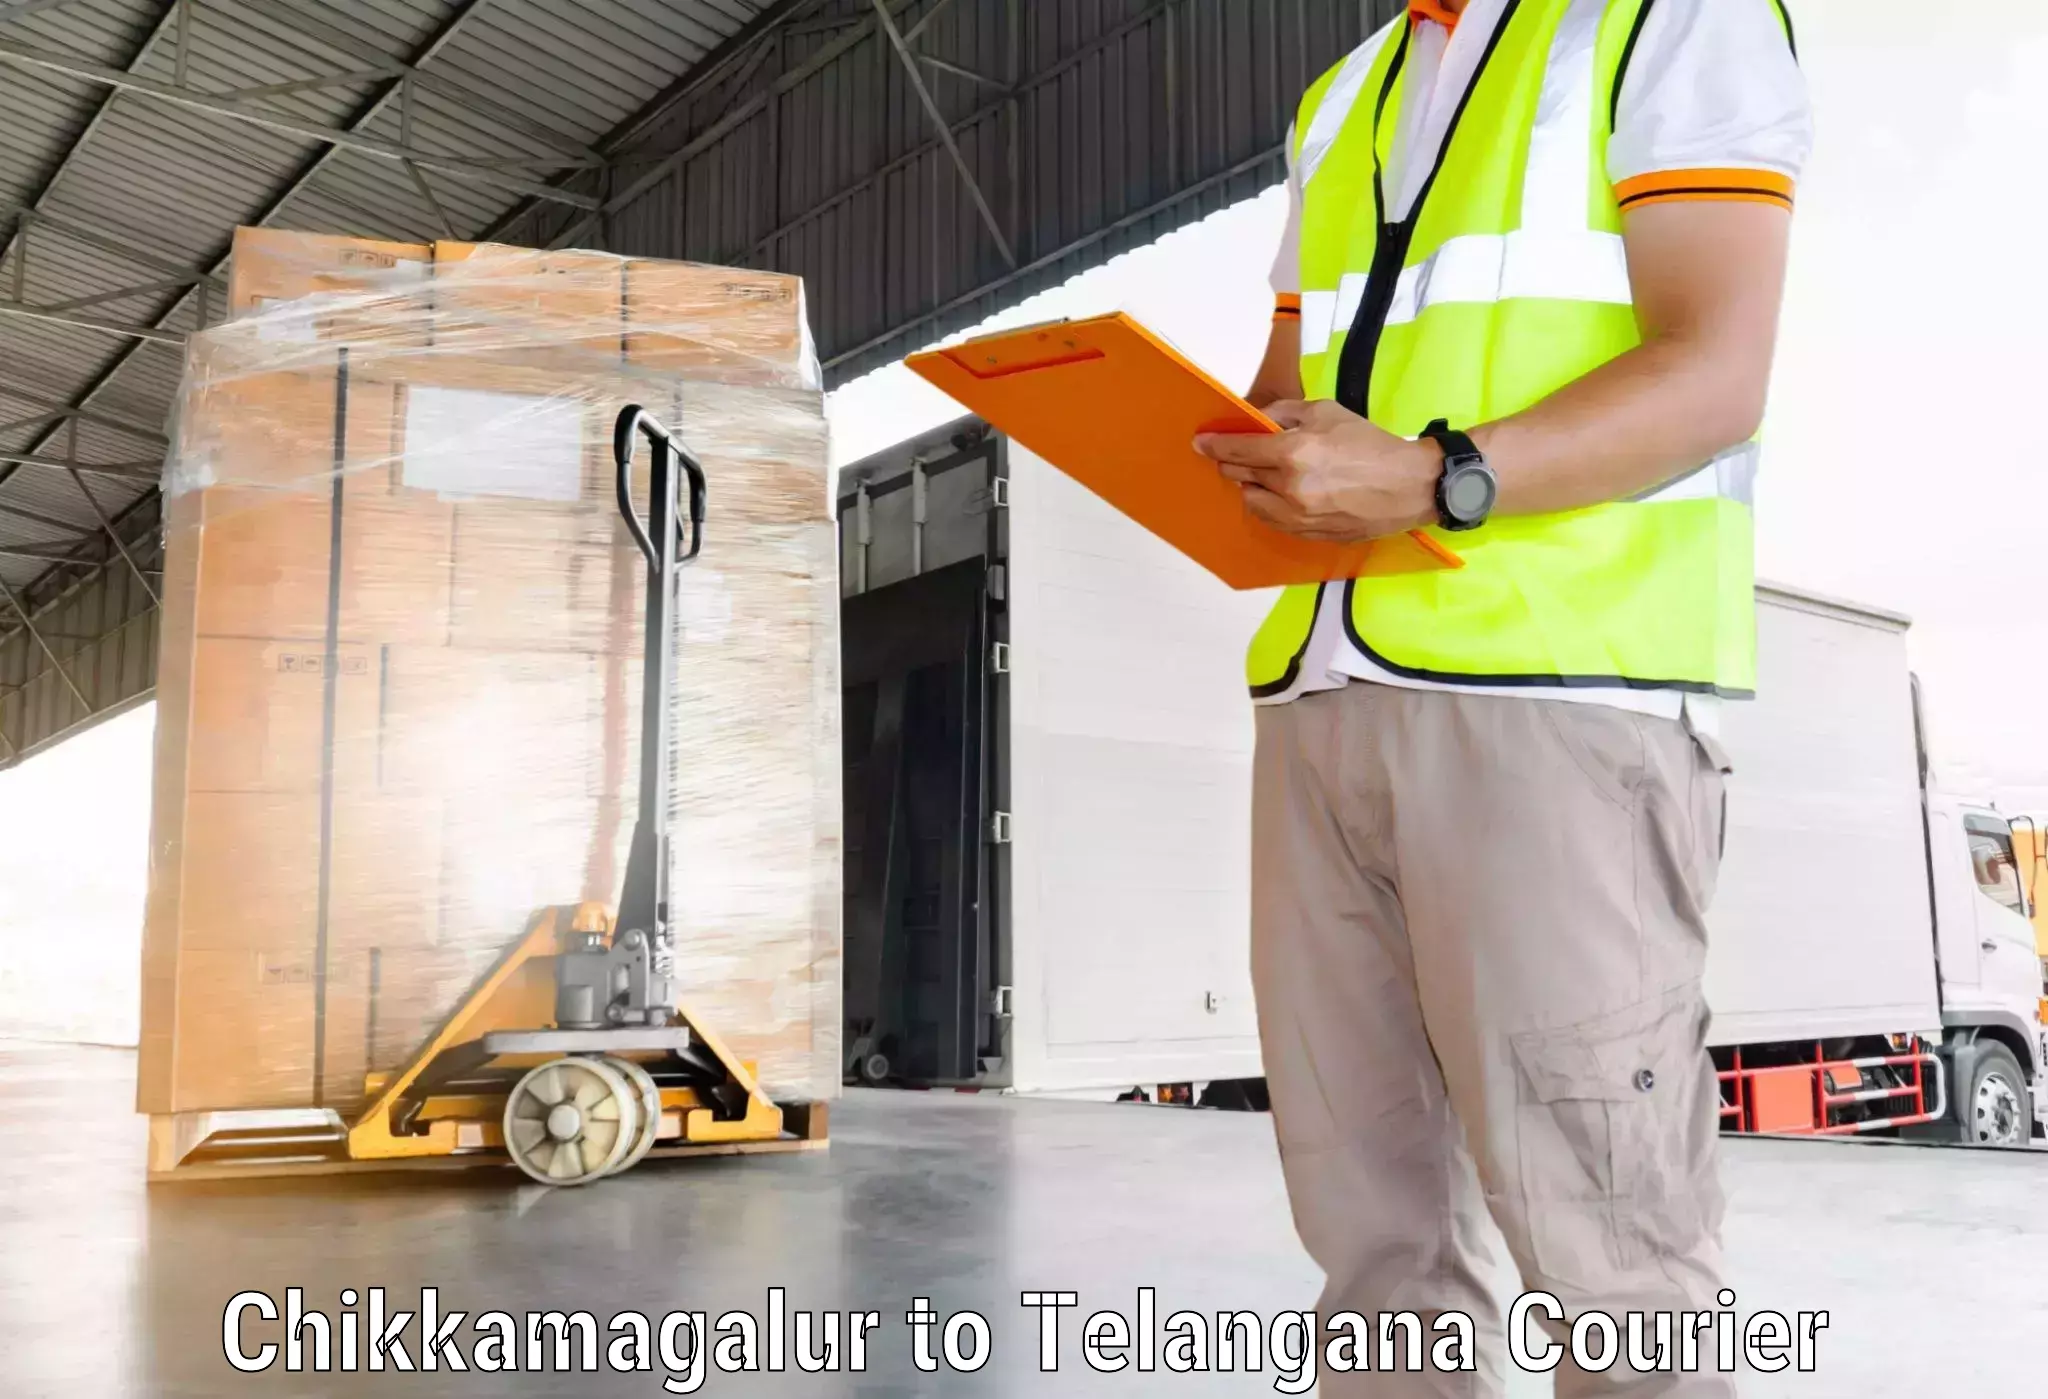 International courier networks Chikkamagalur to Suryapet